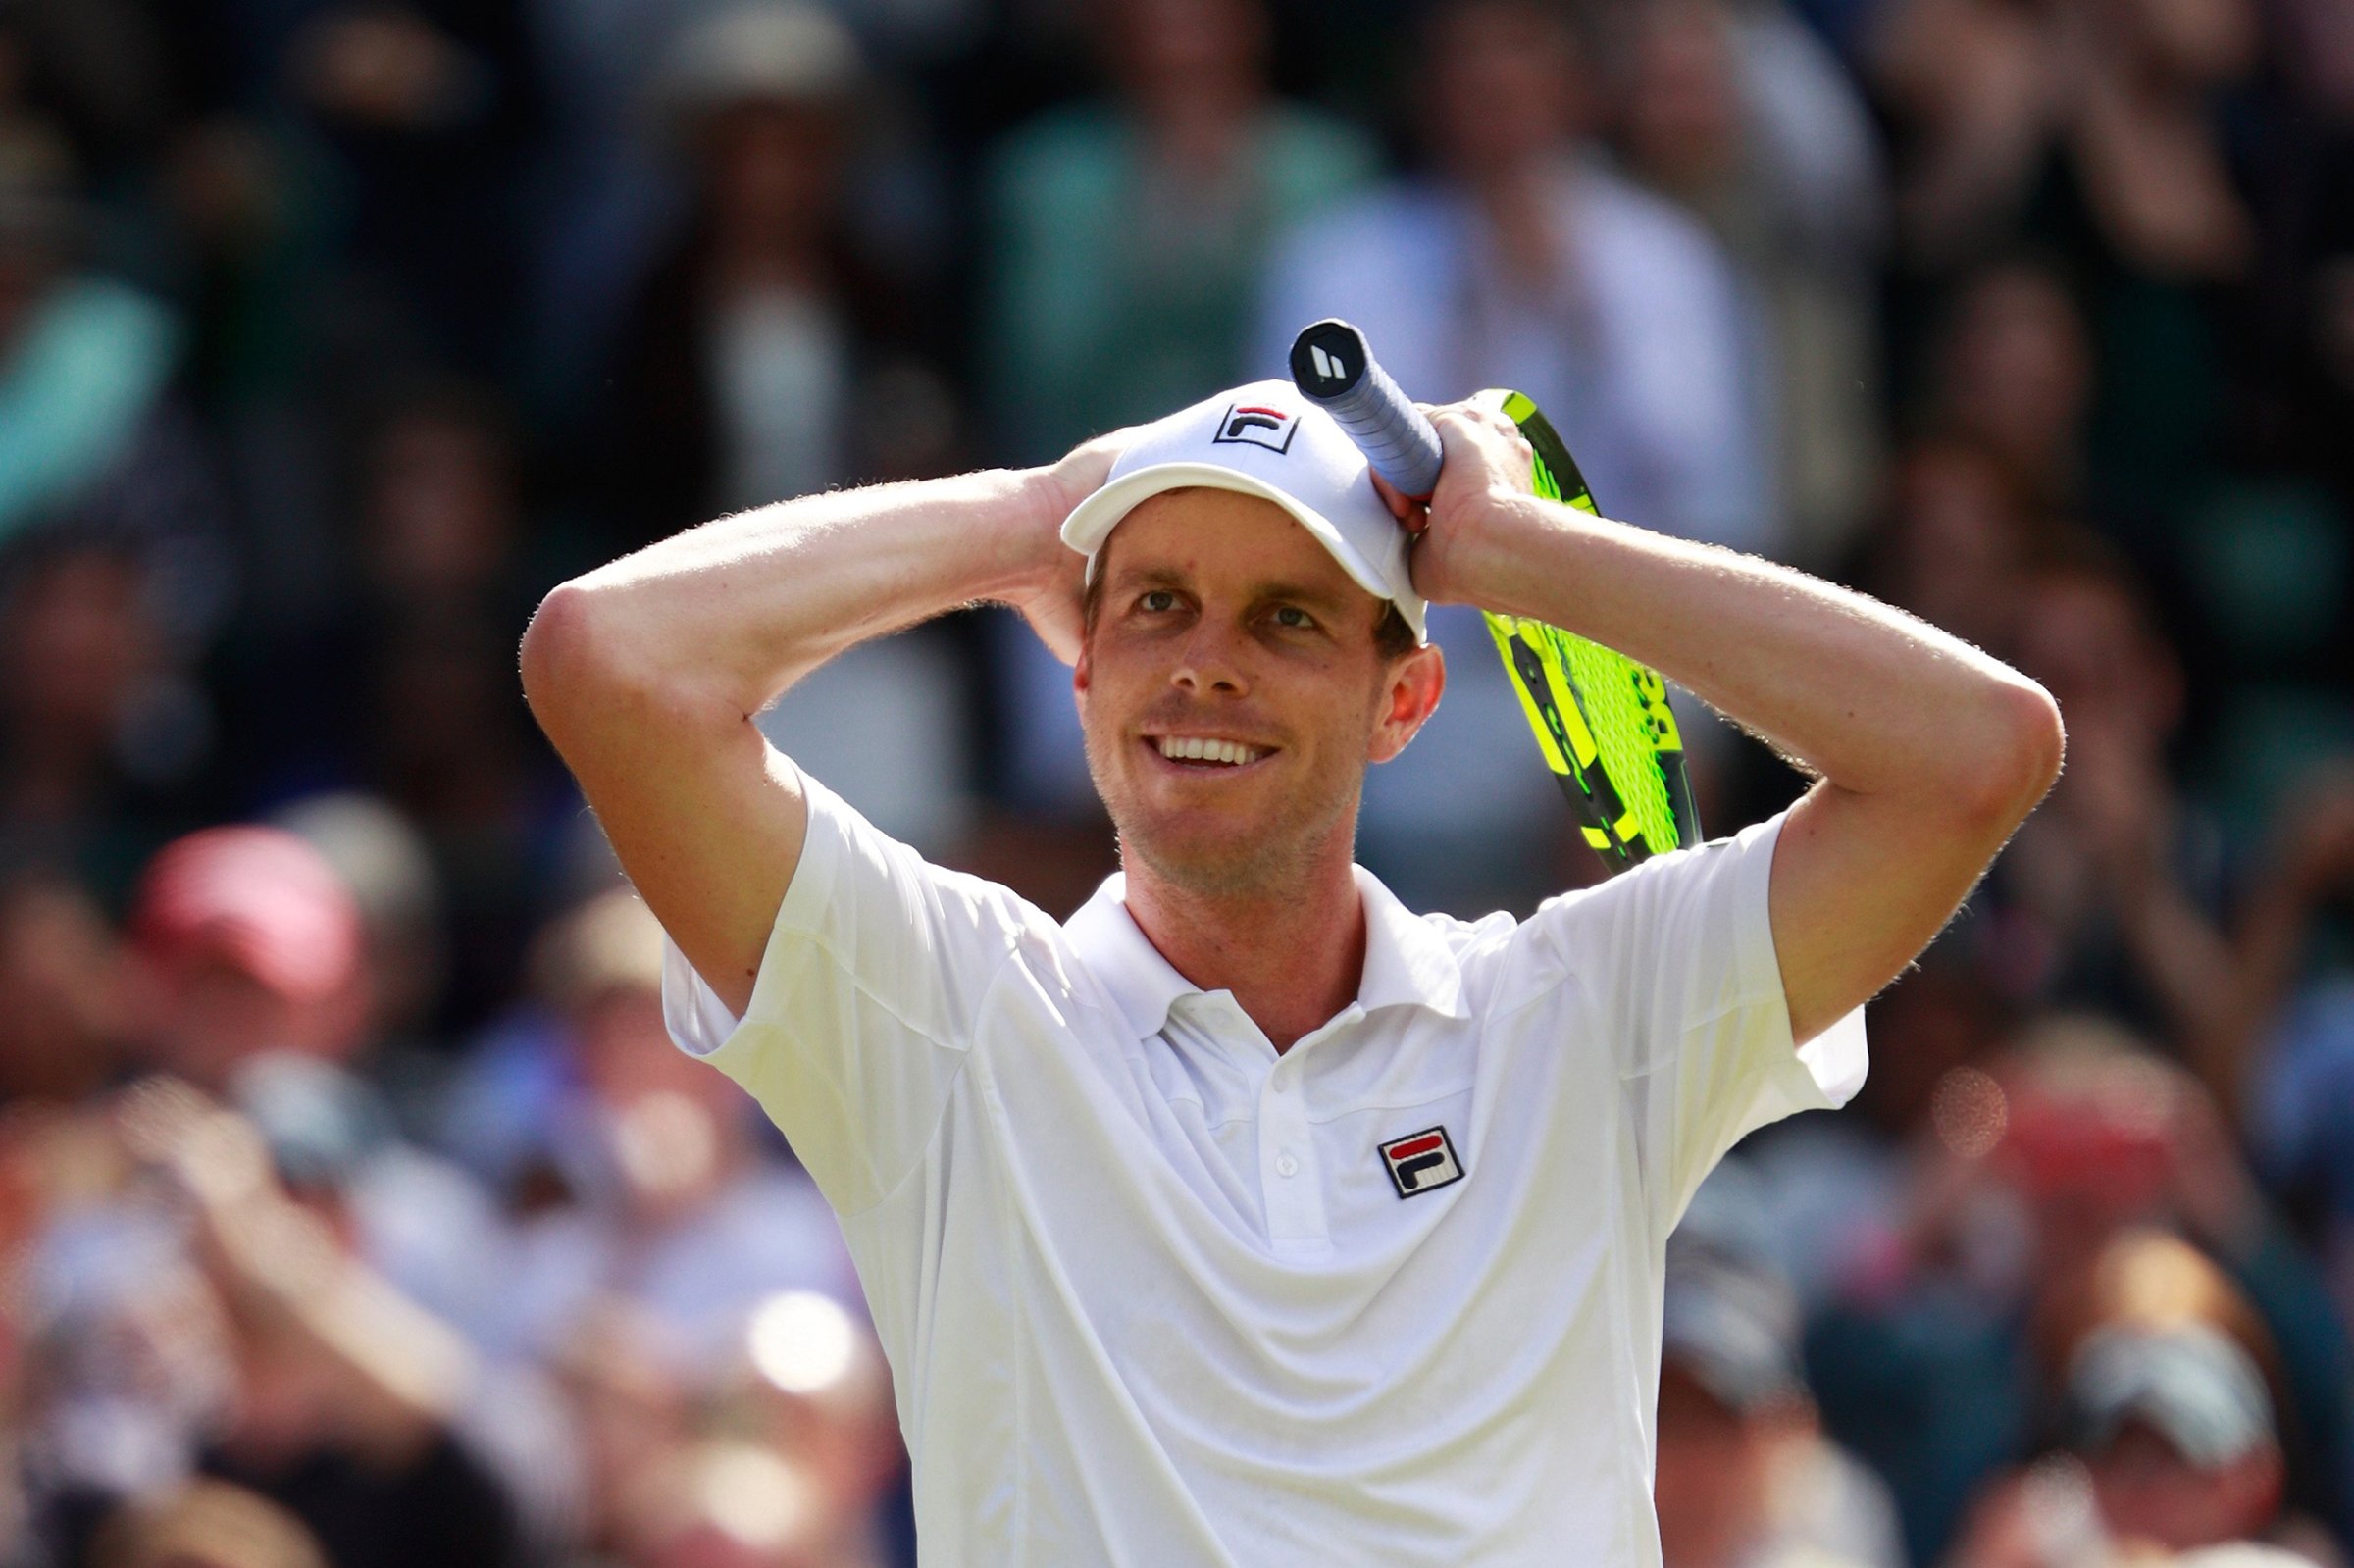 Sam Querrey of the United States celebrates victory during the Men's Singles third round match against Novak Djokovic of Serbia on day six of the Wimbledon Lawn Tennis Championships in London on July 2, 2016.